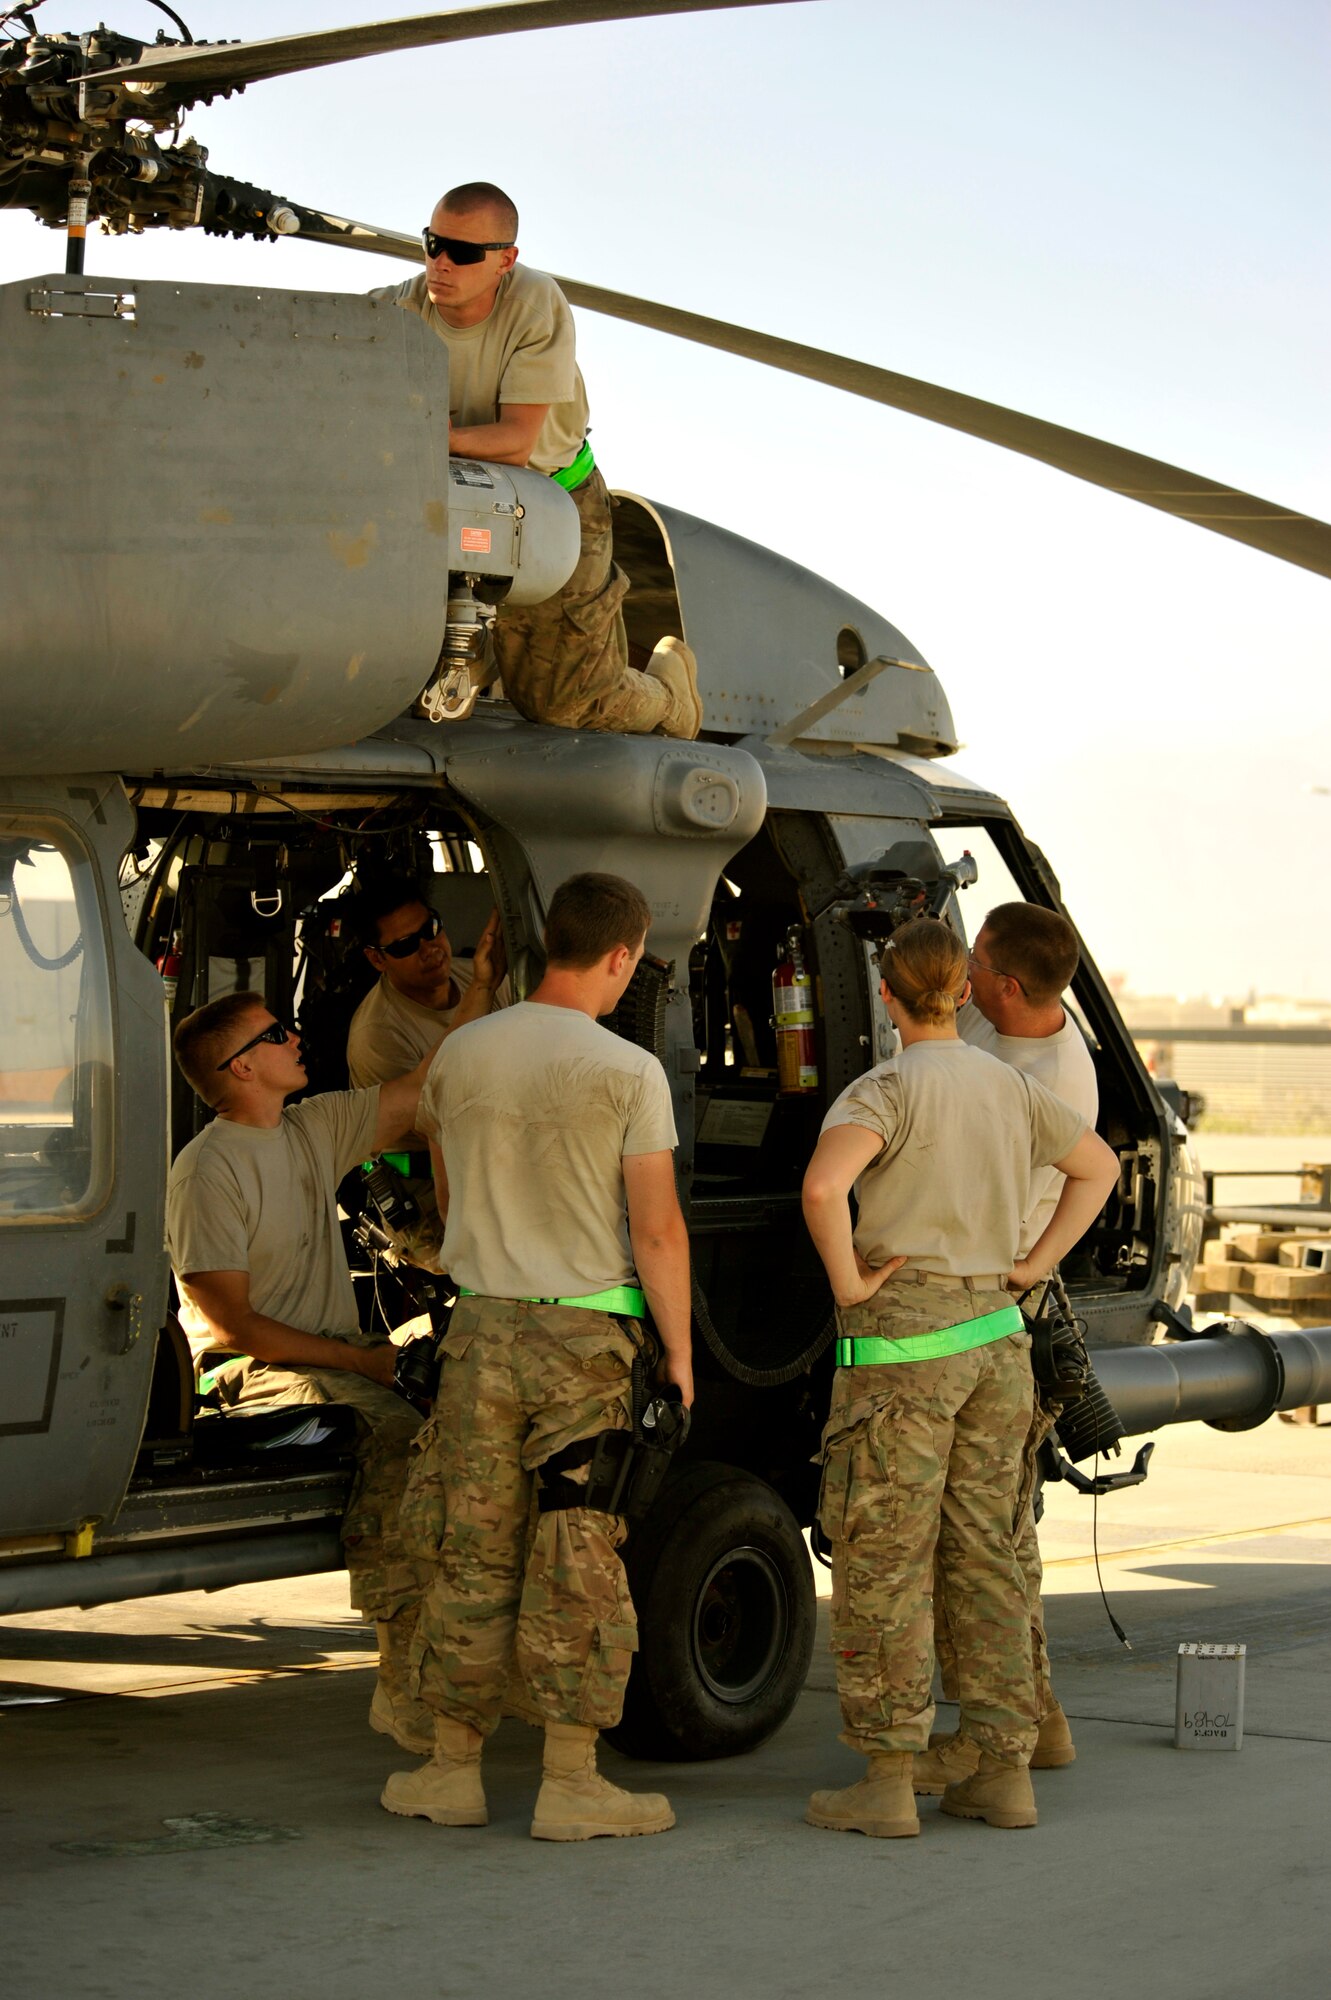 Service members from the 455th Expeditionary Maintenance Squadron conduct a 50-hour preventative maintenance inspection on aircraft 89-6205, an HH-60G Pave Hawk helicopter assigned to the 56th Expeditionary Helicopter Maintenance Unit at Bagram Airfield, Afghanistan, July 24, 2013. The Airmen, are deployed from the 748th Aircraft Maintenance Squadron at Royal Air Force Lakenheath, England. (U.S. Air Force photo/Staff Sgt. Stephenie Wade)